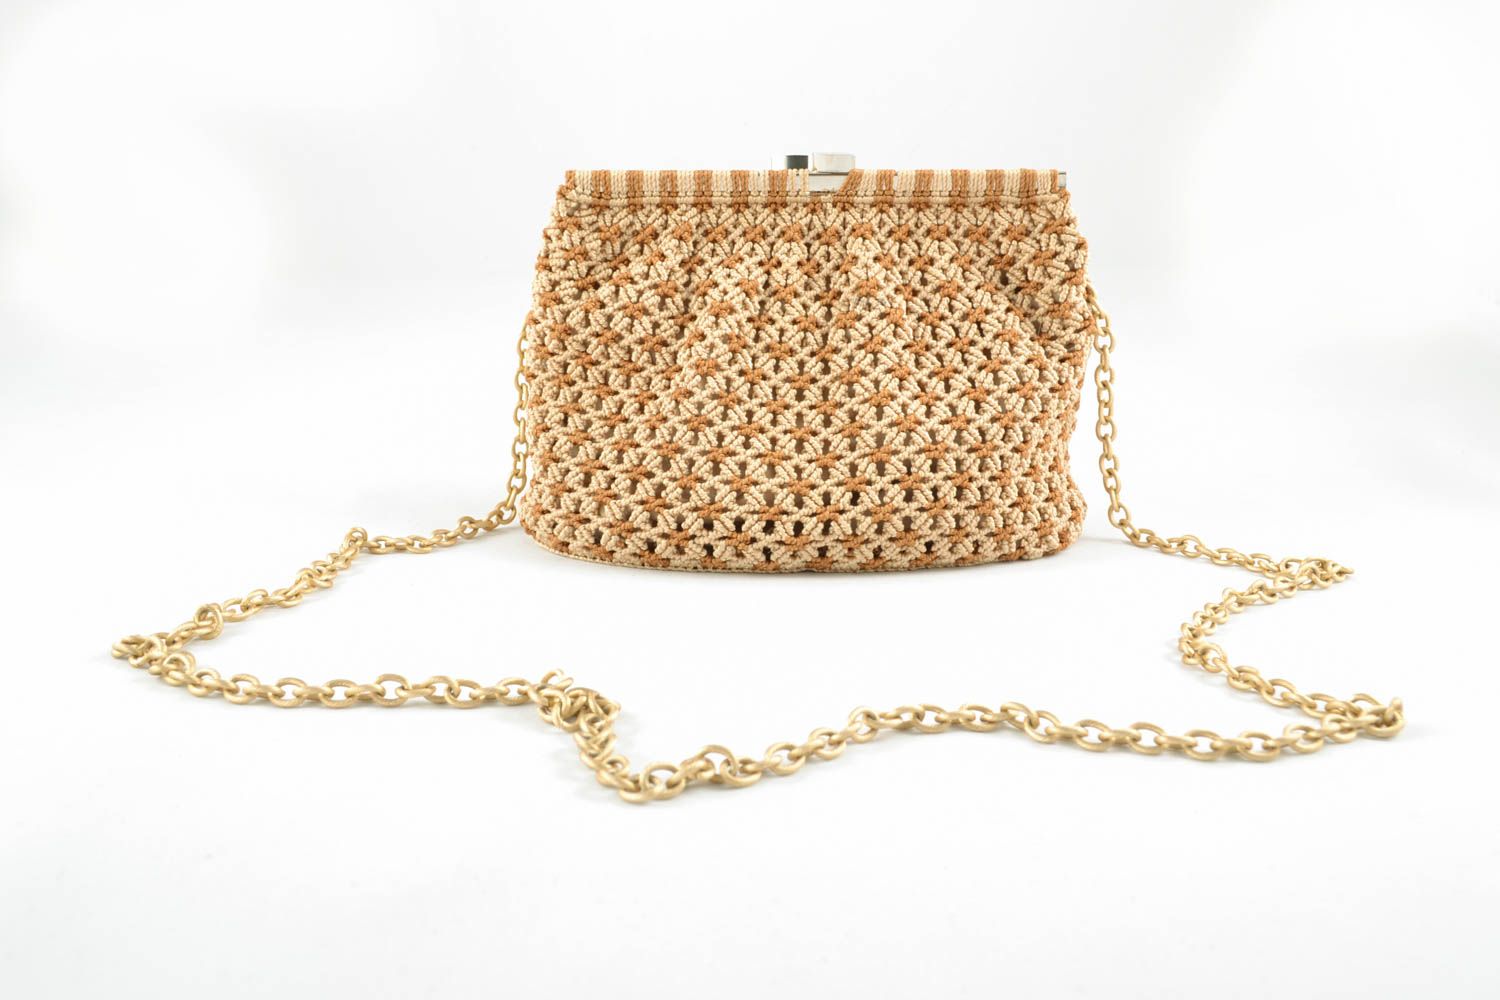 Macrame woven bag with a chain photo 2